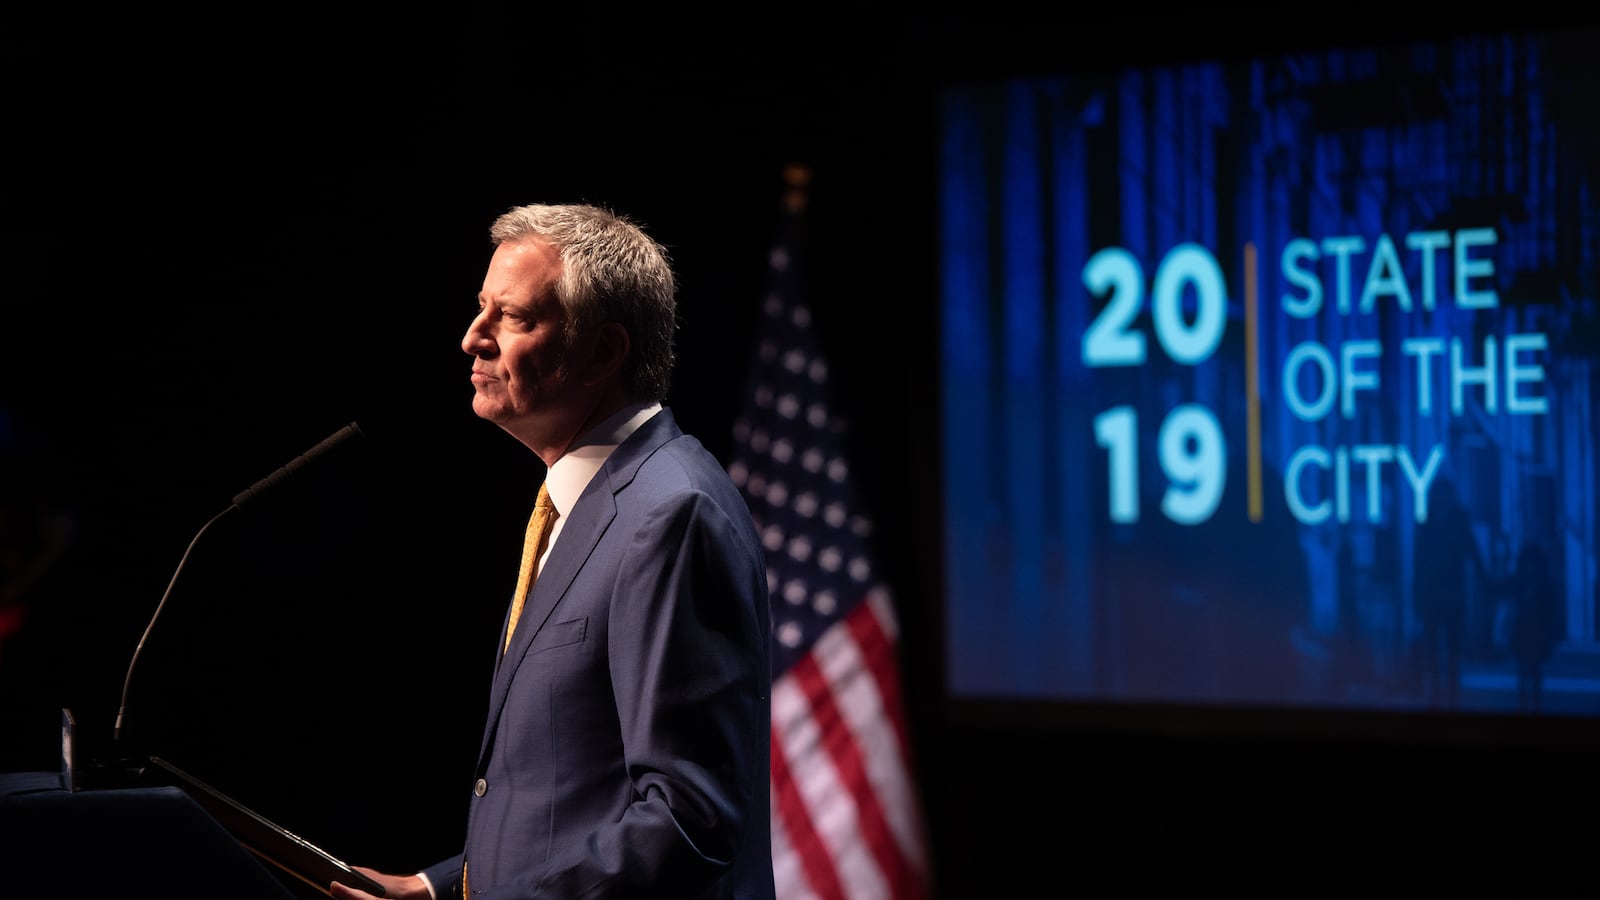 Mayor Bill de Blasio delivers his sixth State of the City address at the Symphony Space in Manhattan on Thursday